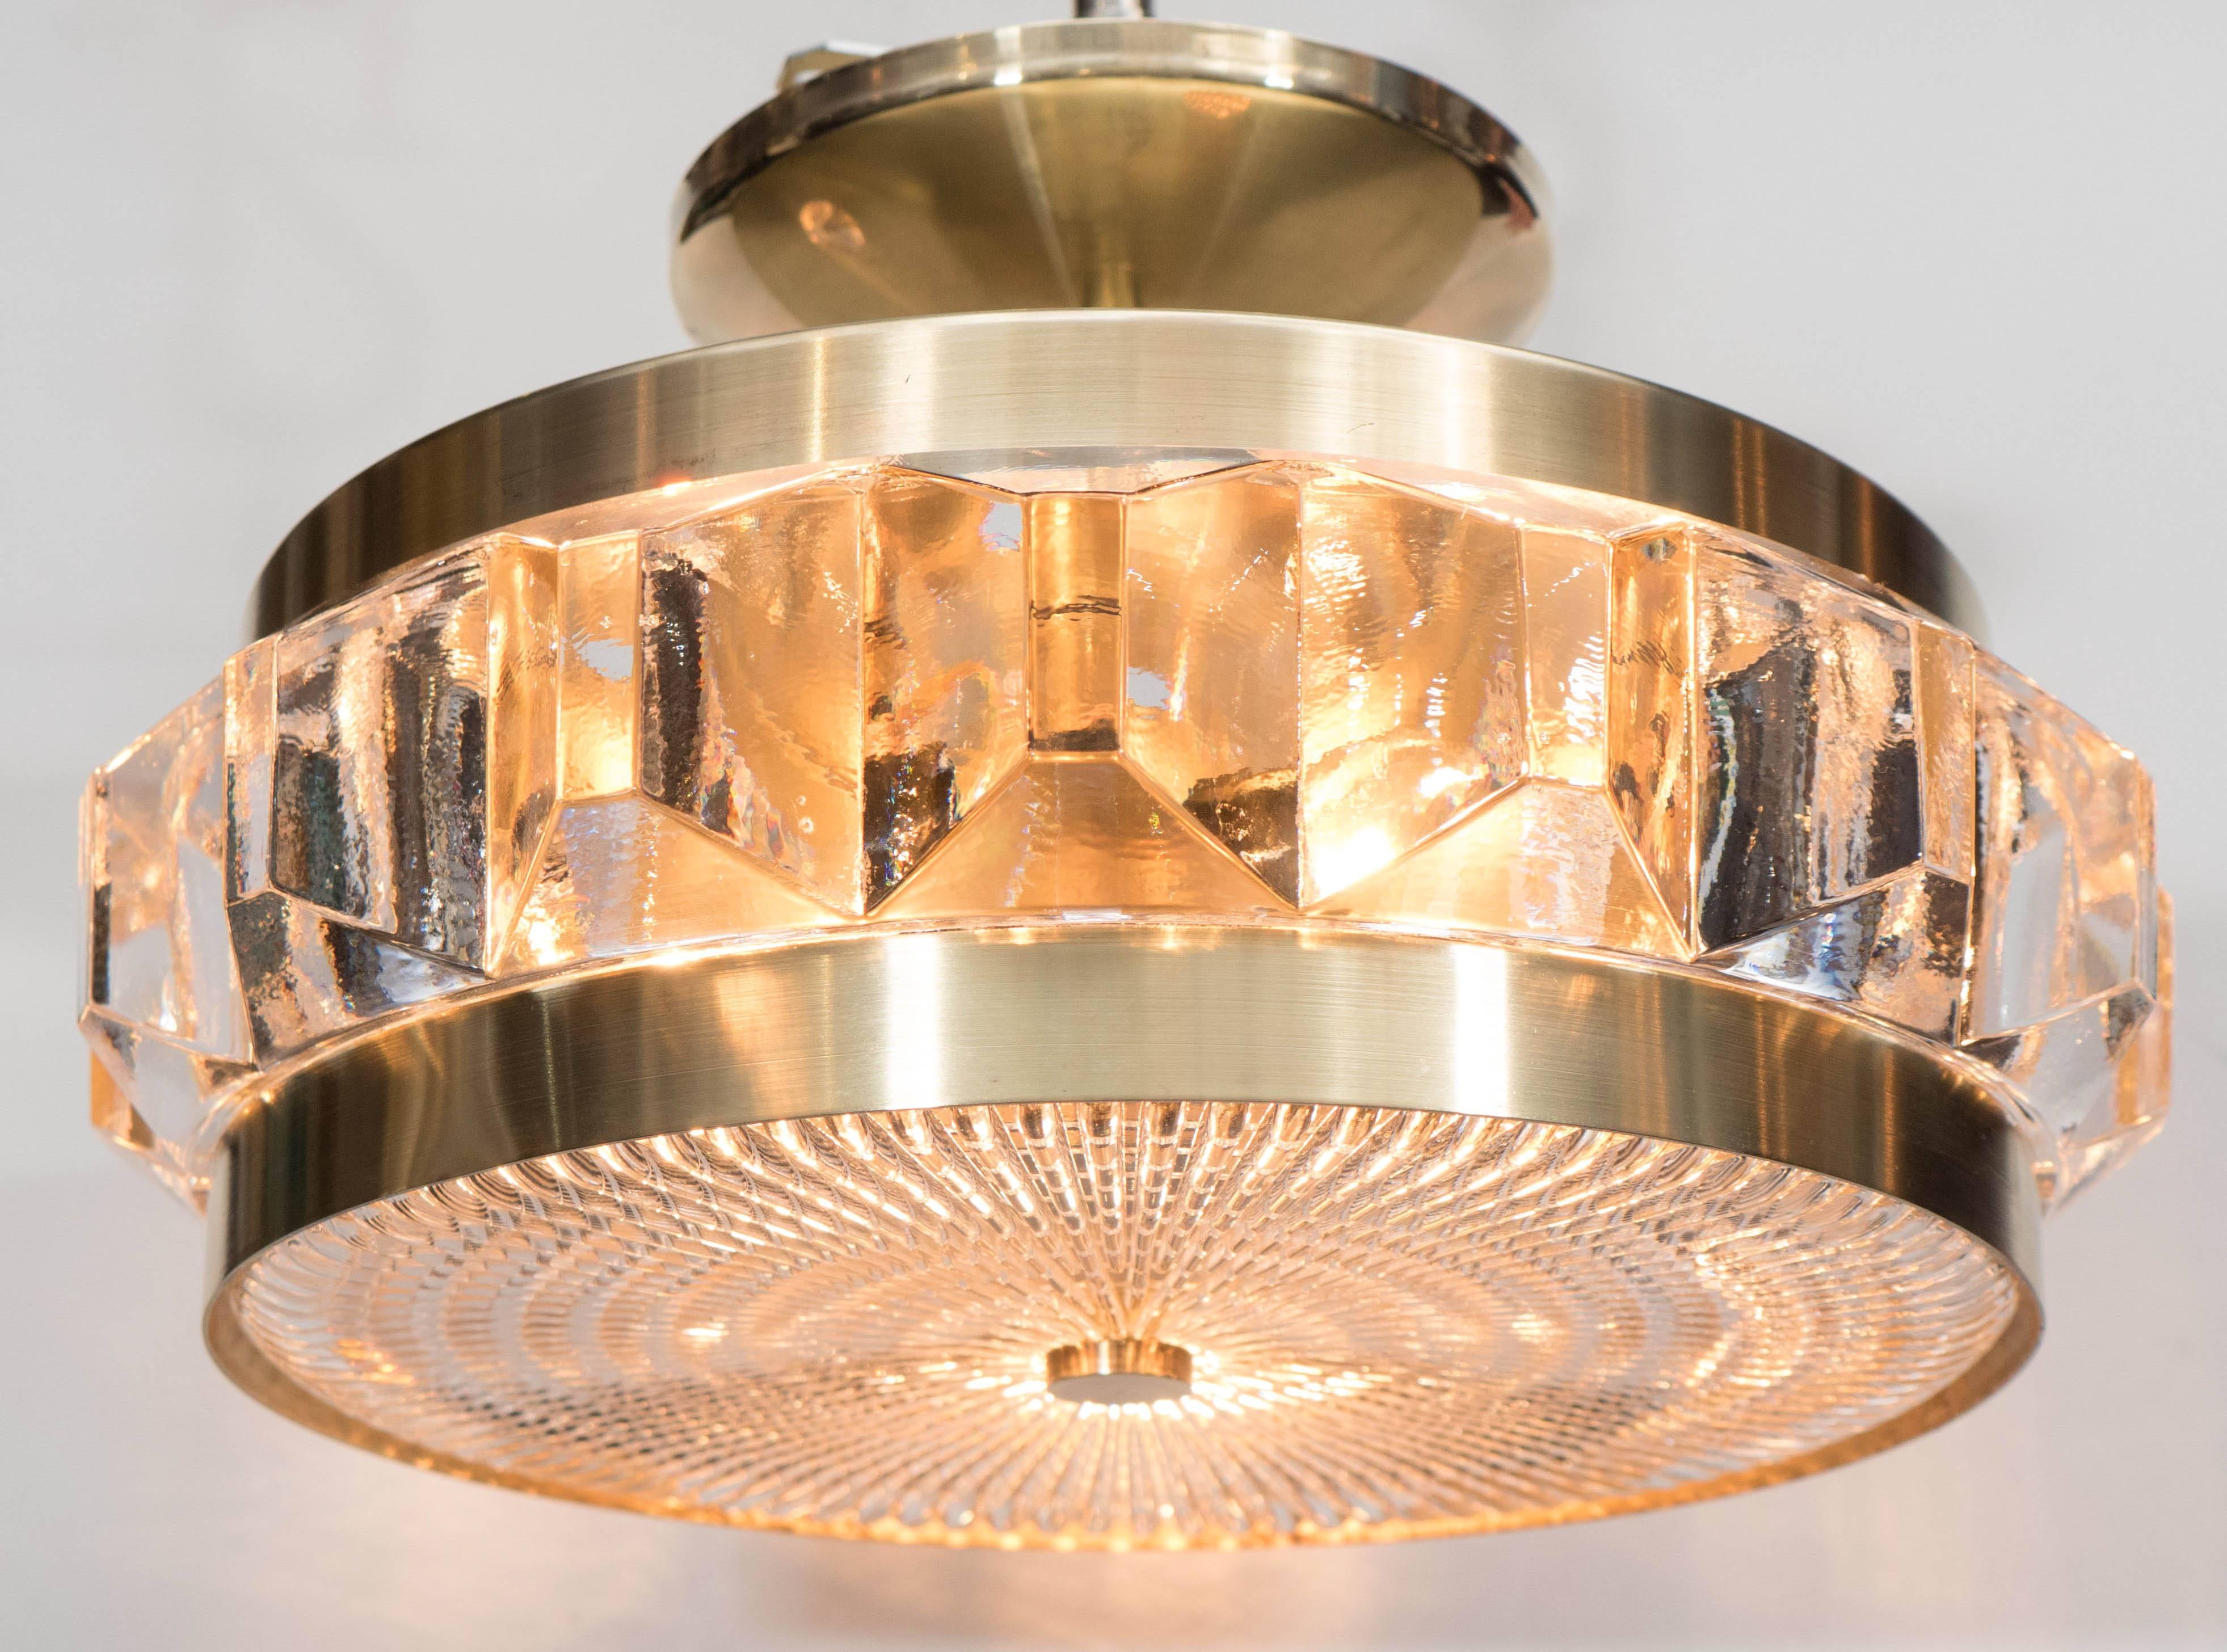 Gorgeous Mid-Century Modernist flush mount pendant chandelier with textured glass and brushed brass fittings by Orrefors. Parallel brass bands encase a textured glass disk supported by a brass fitting, as well as a faceted glass band. A very elegant